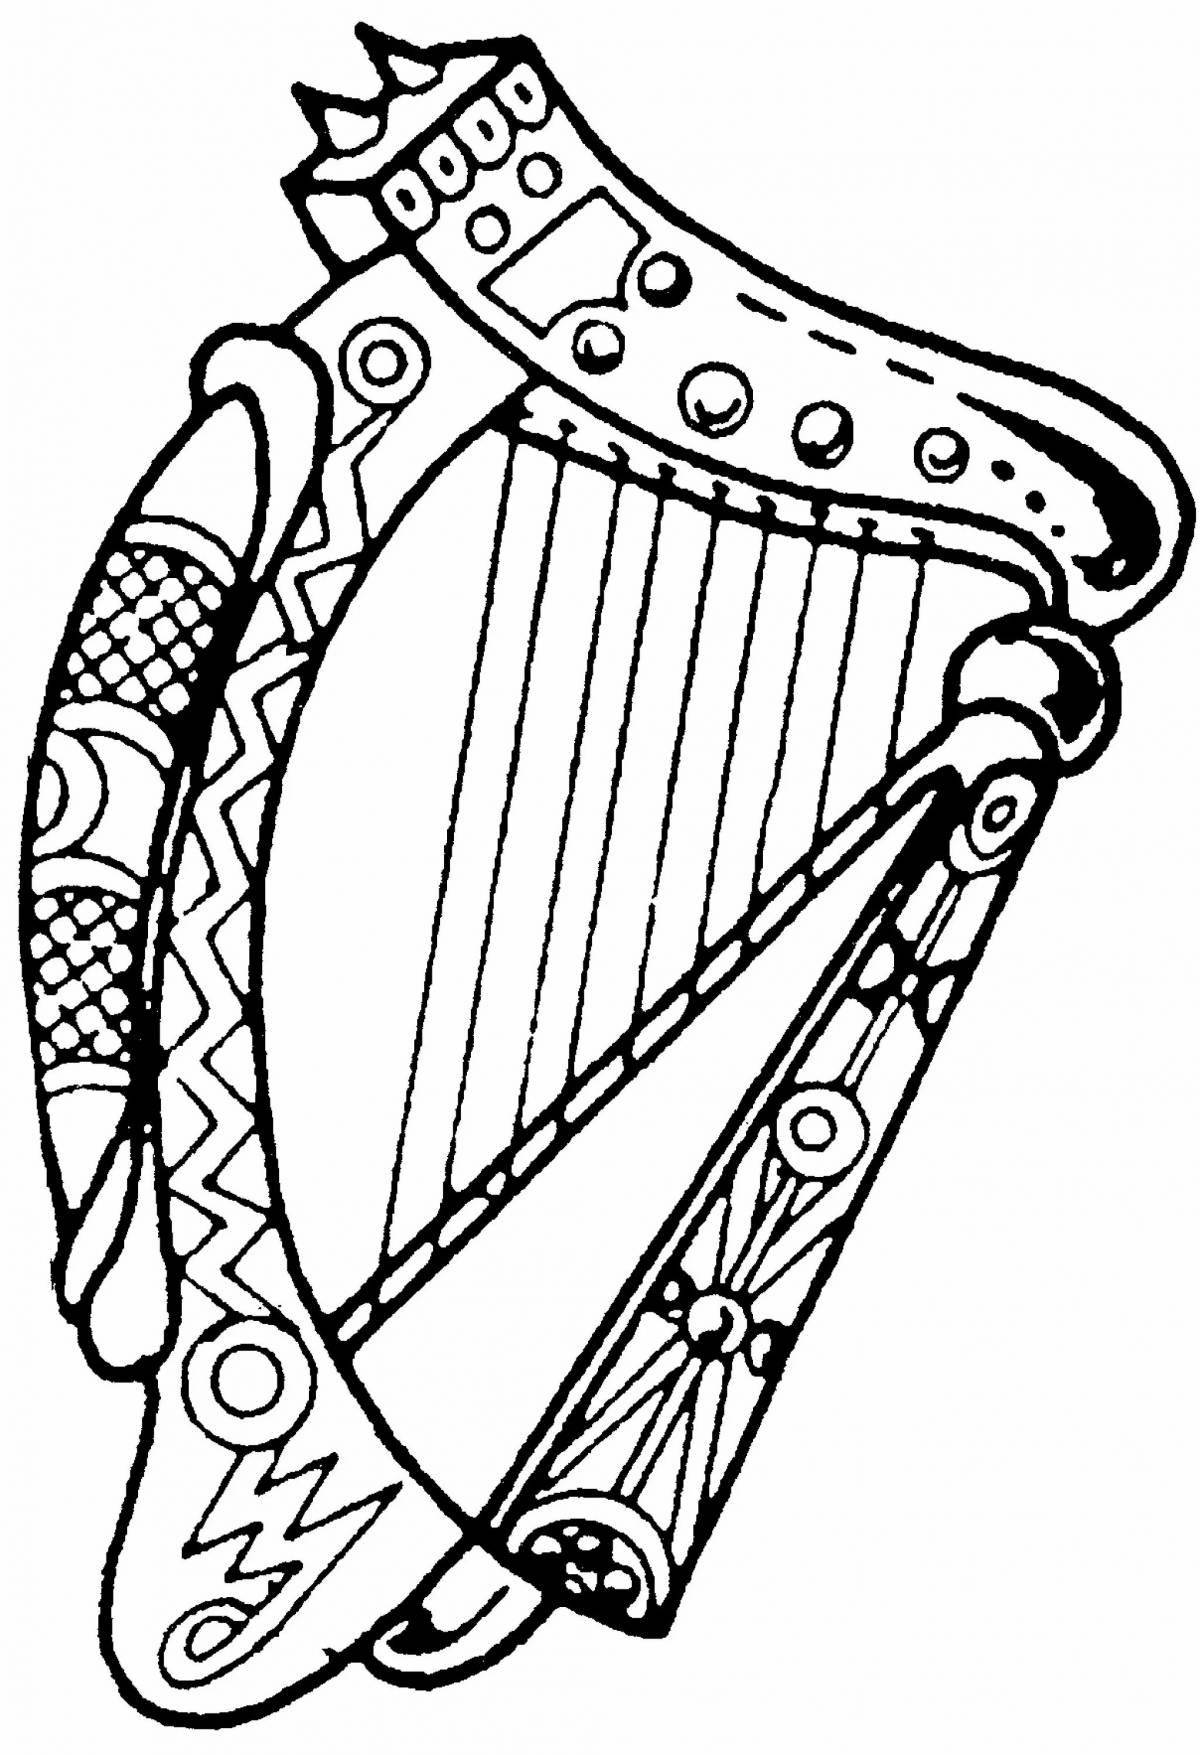 Coloring page musical instrument jupiter psaltery